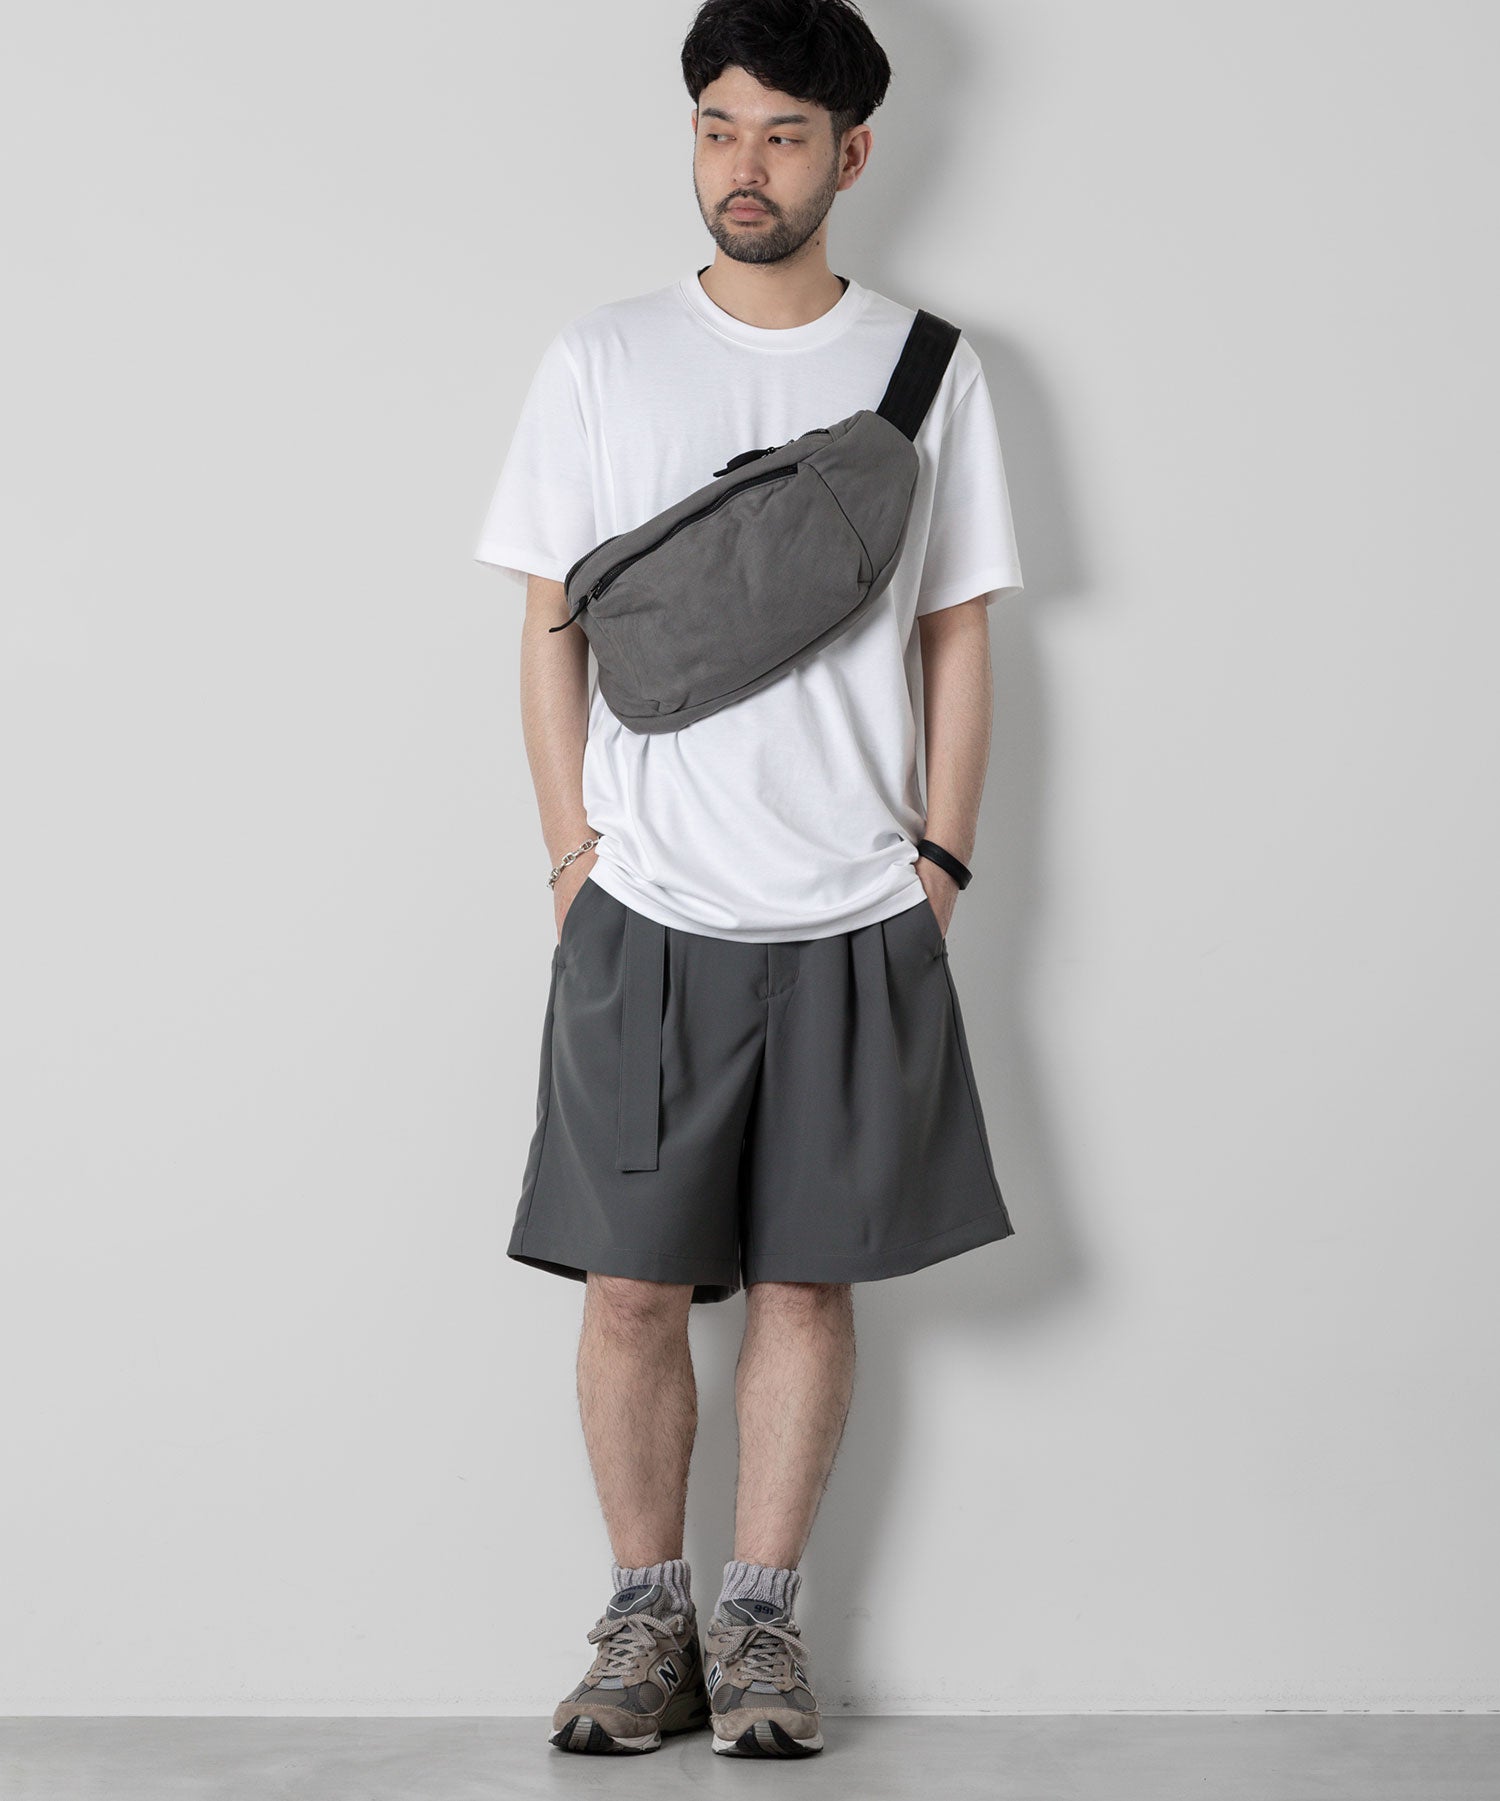 【ATTACHMENT】ATTACHMENT アタッチメントのPE COMPACT TWILL BELTED SHORTS - GRAY 公式通販サイトsession福岡セレクトショップ